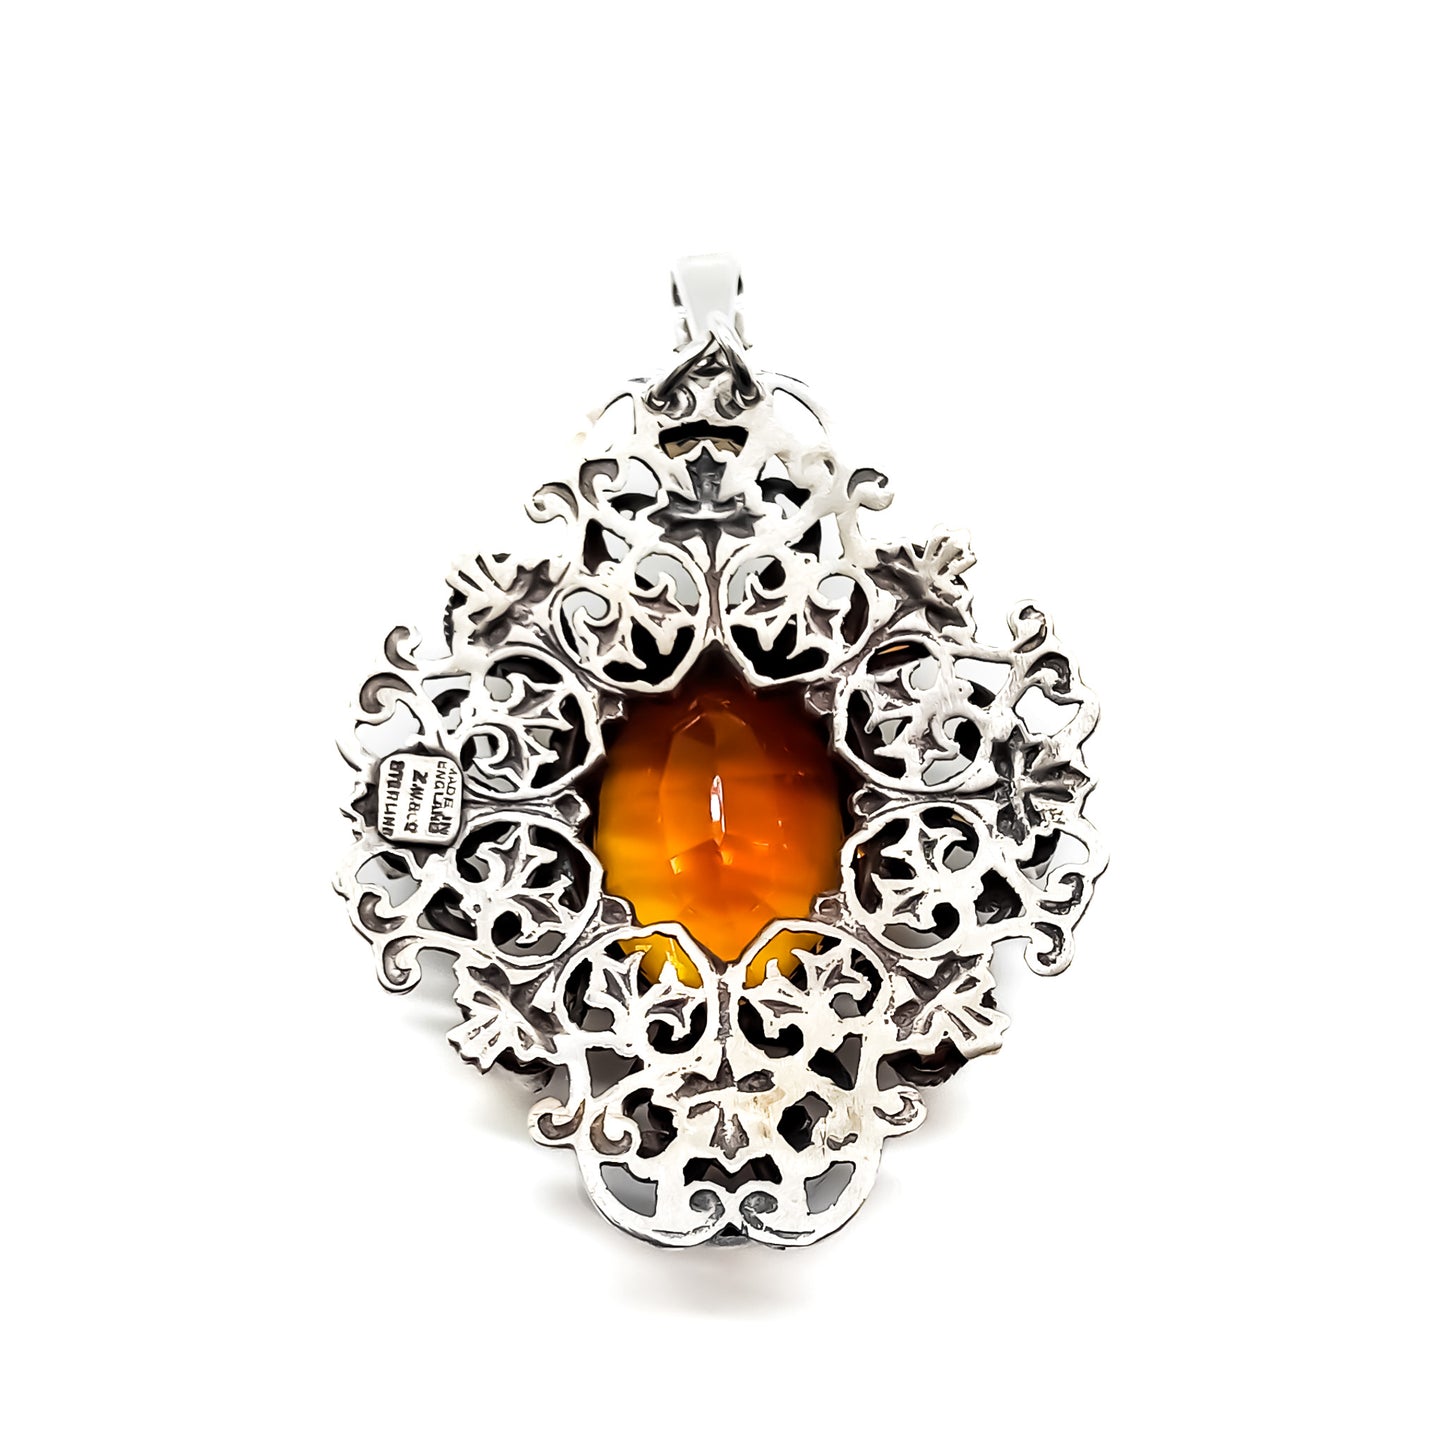 Very ornate sterling silver Arts and Crafts pendant set with a large, beautifully faceted citrine, surrounded by eight small triangular citrines. Circa 1920’s